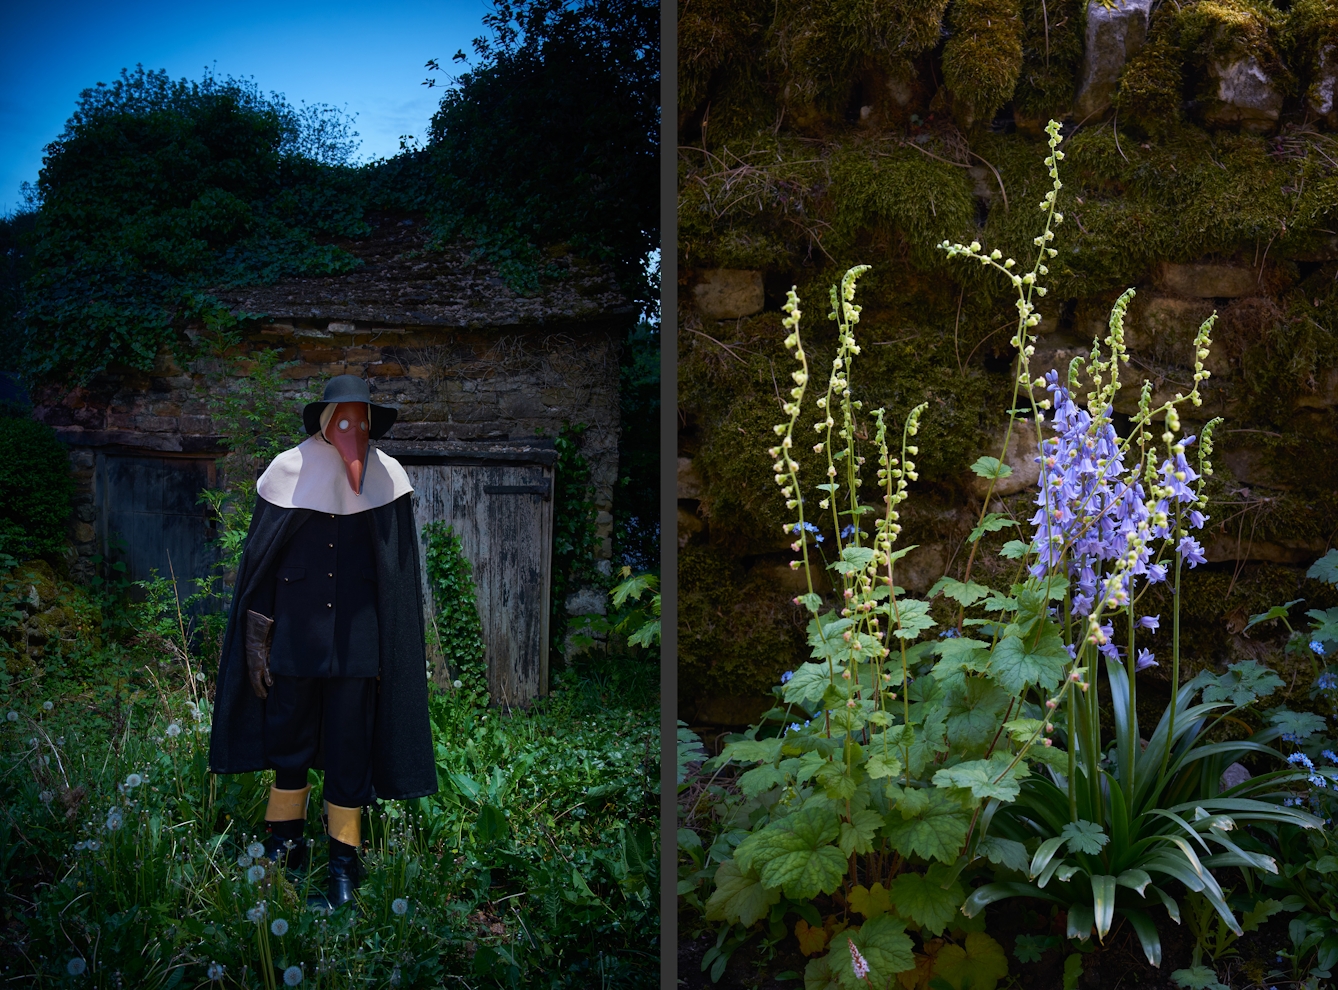 Photographic diptych showing on the left a mannequin dressed as a plague doctor, against an old brick barn building, surrounded by foliage. On the right is a photograph of local flora against a dry stone wall covered in moss.